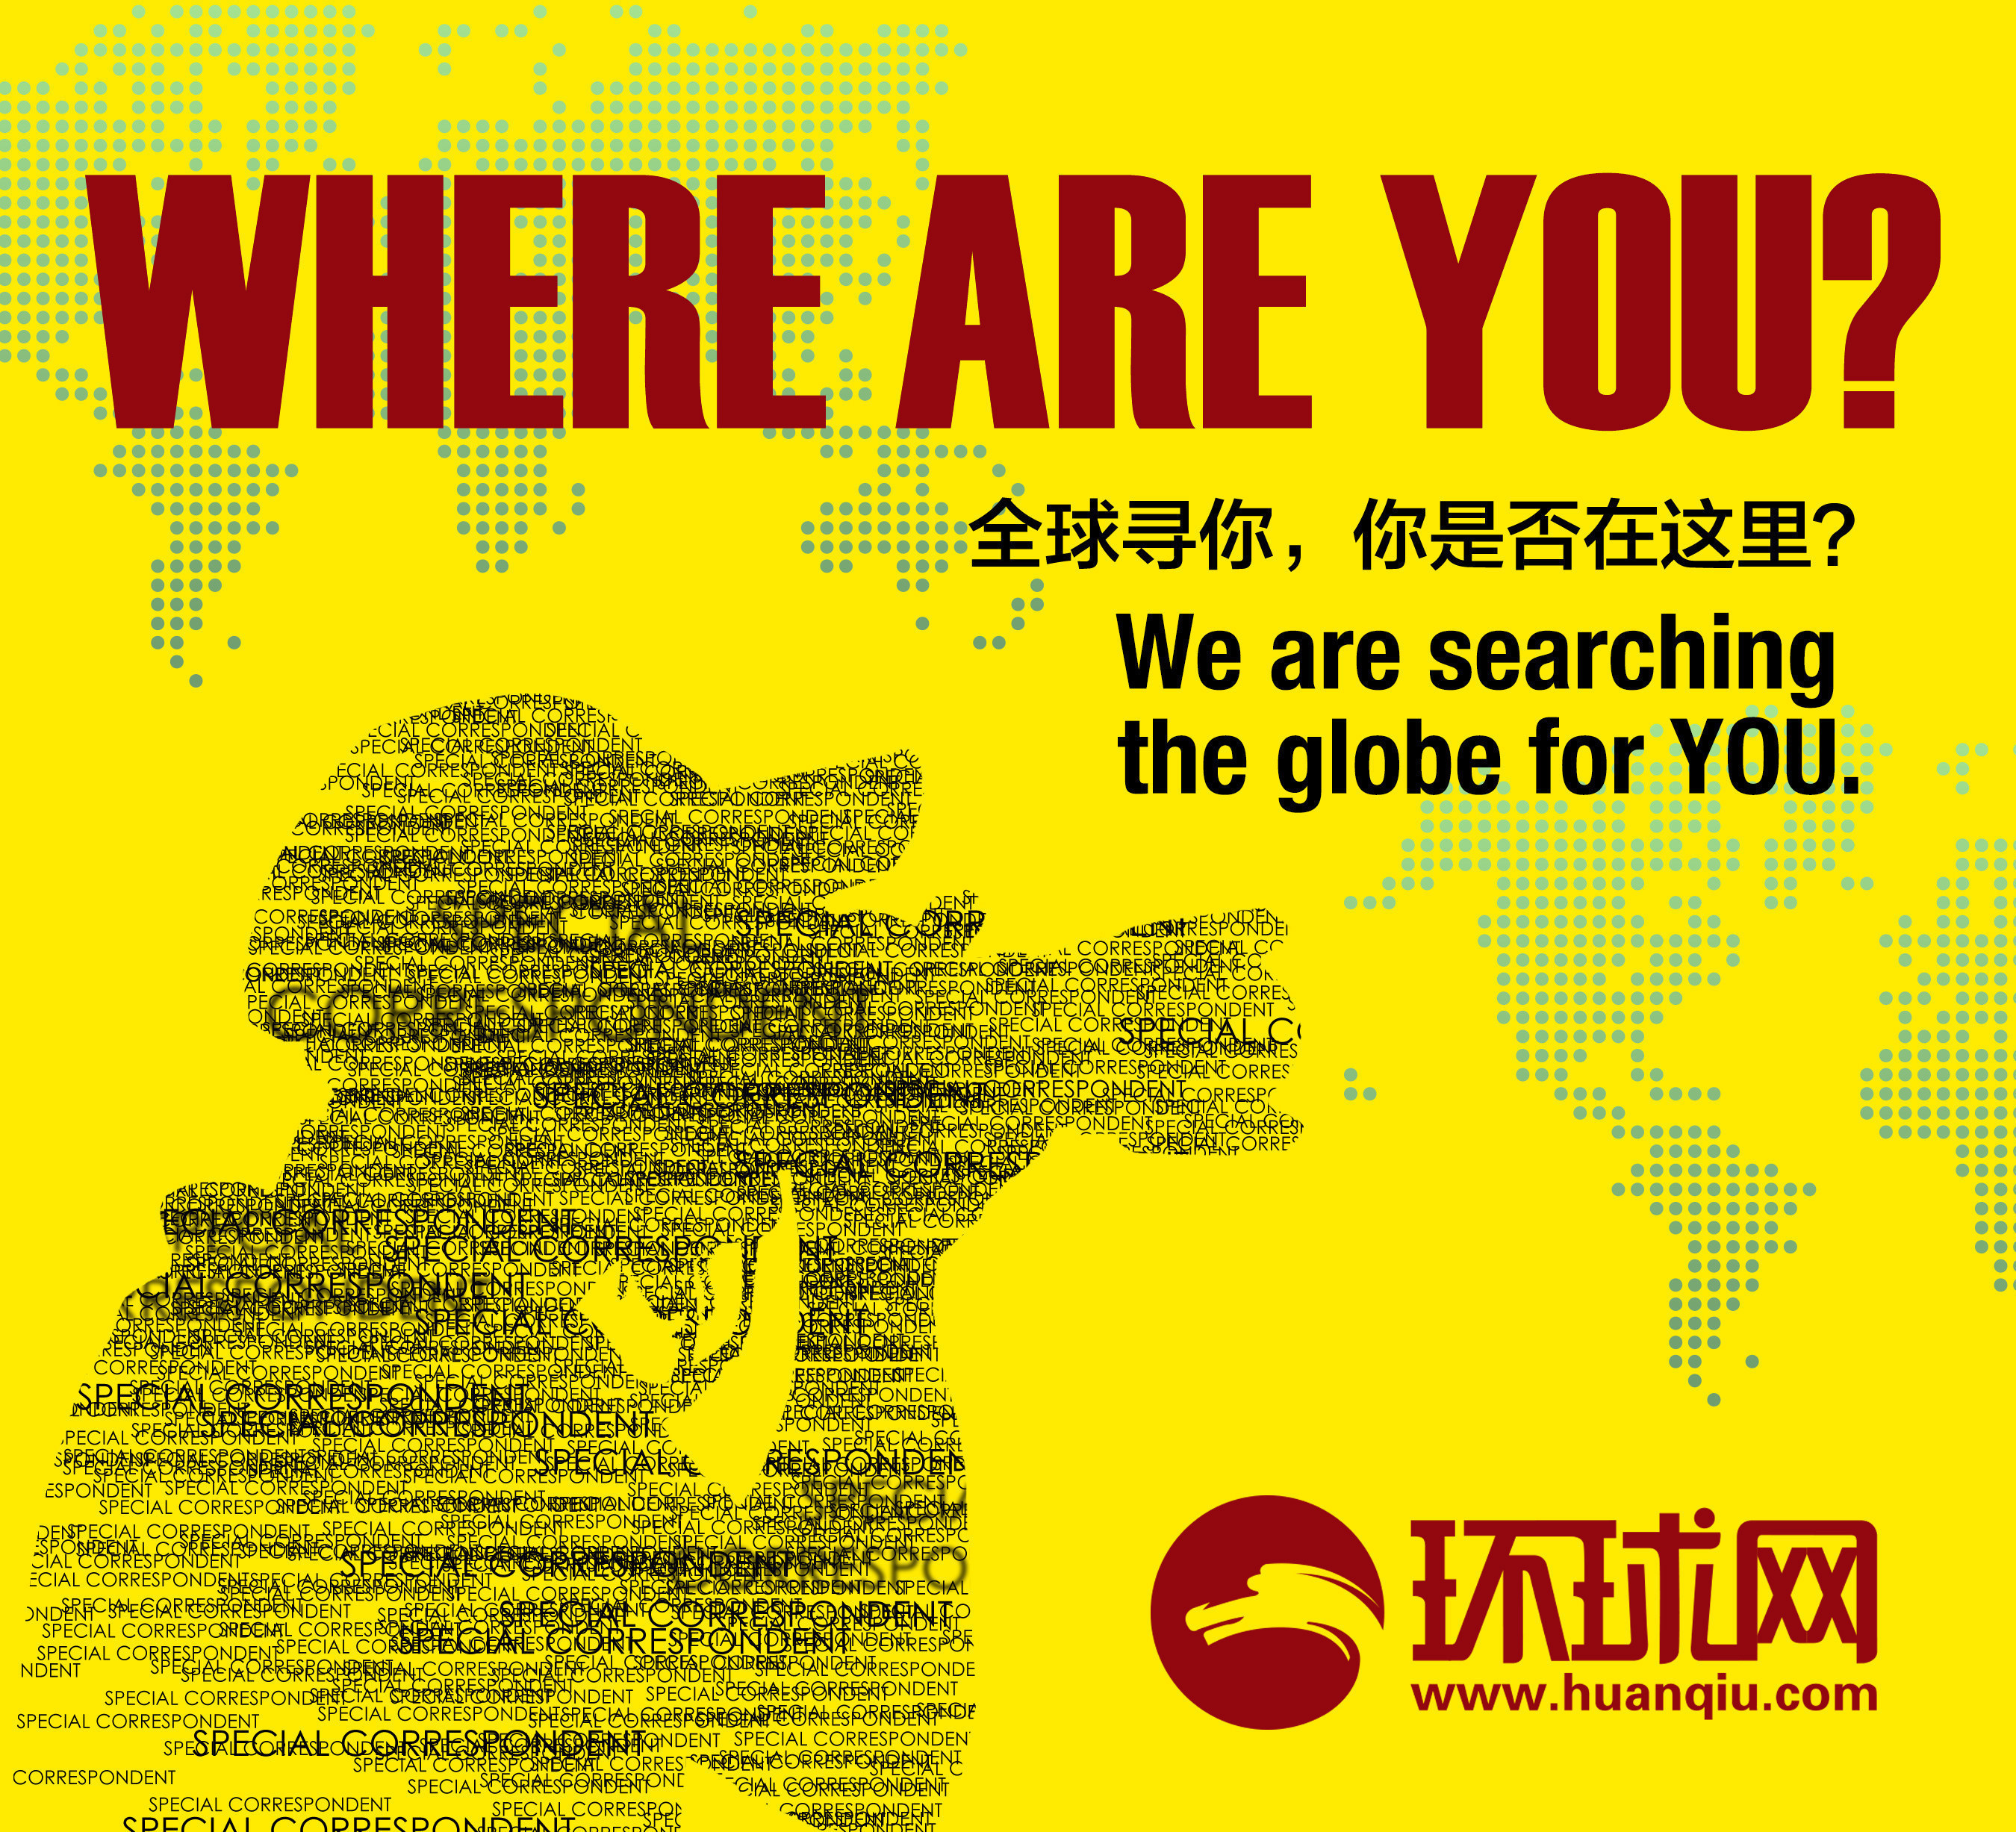 Overseas special correspondents wanted at Huanqiu.com